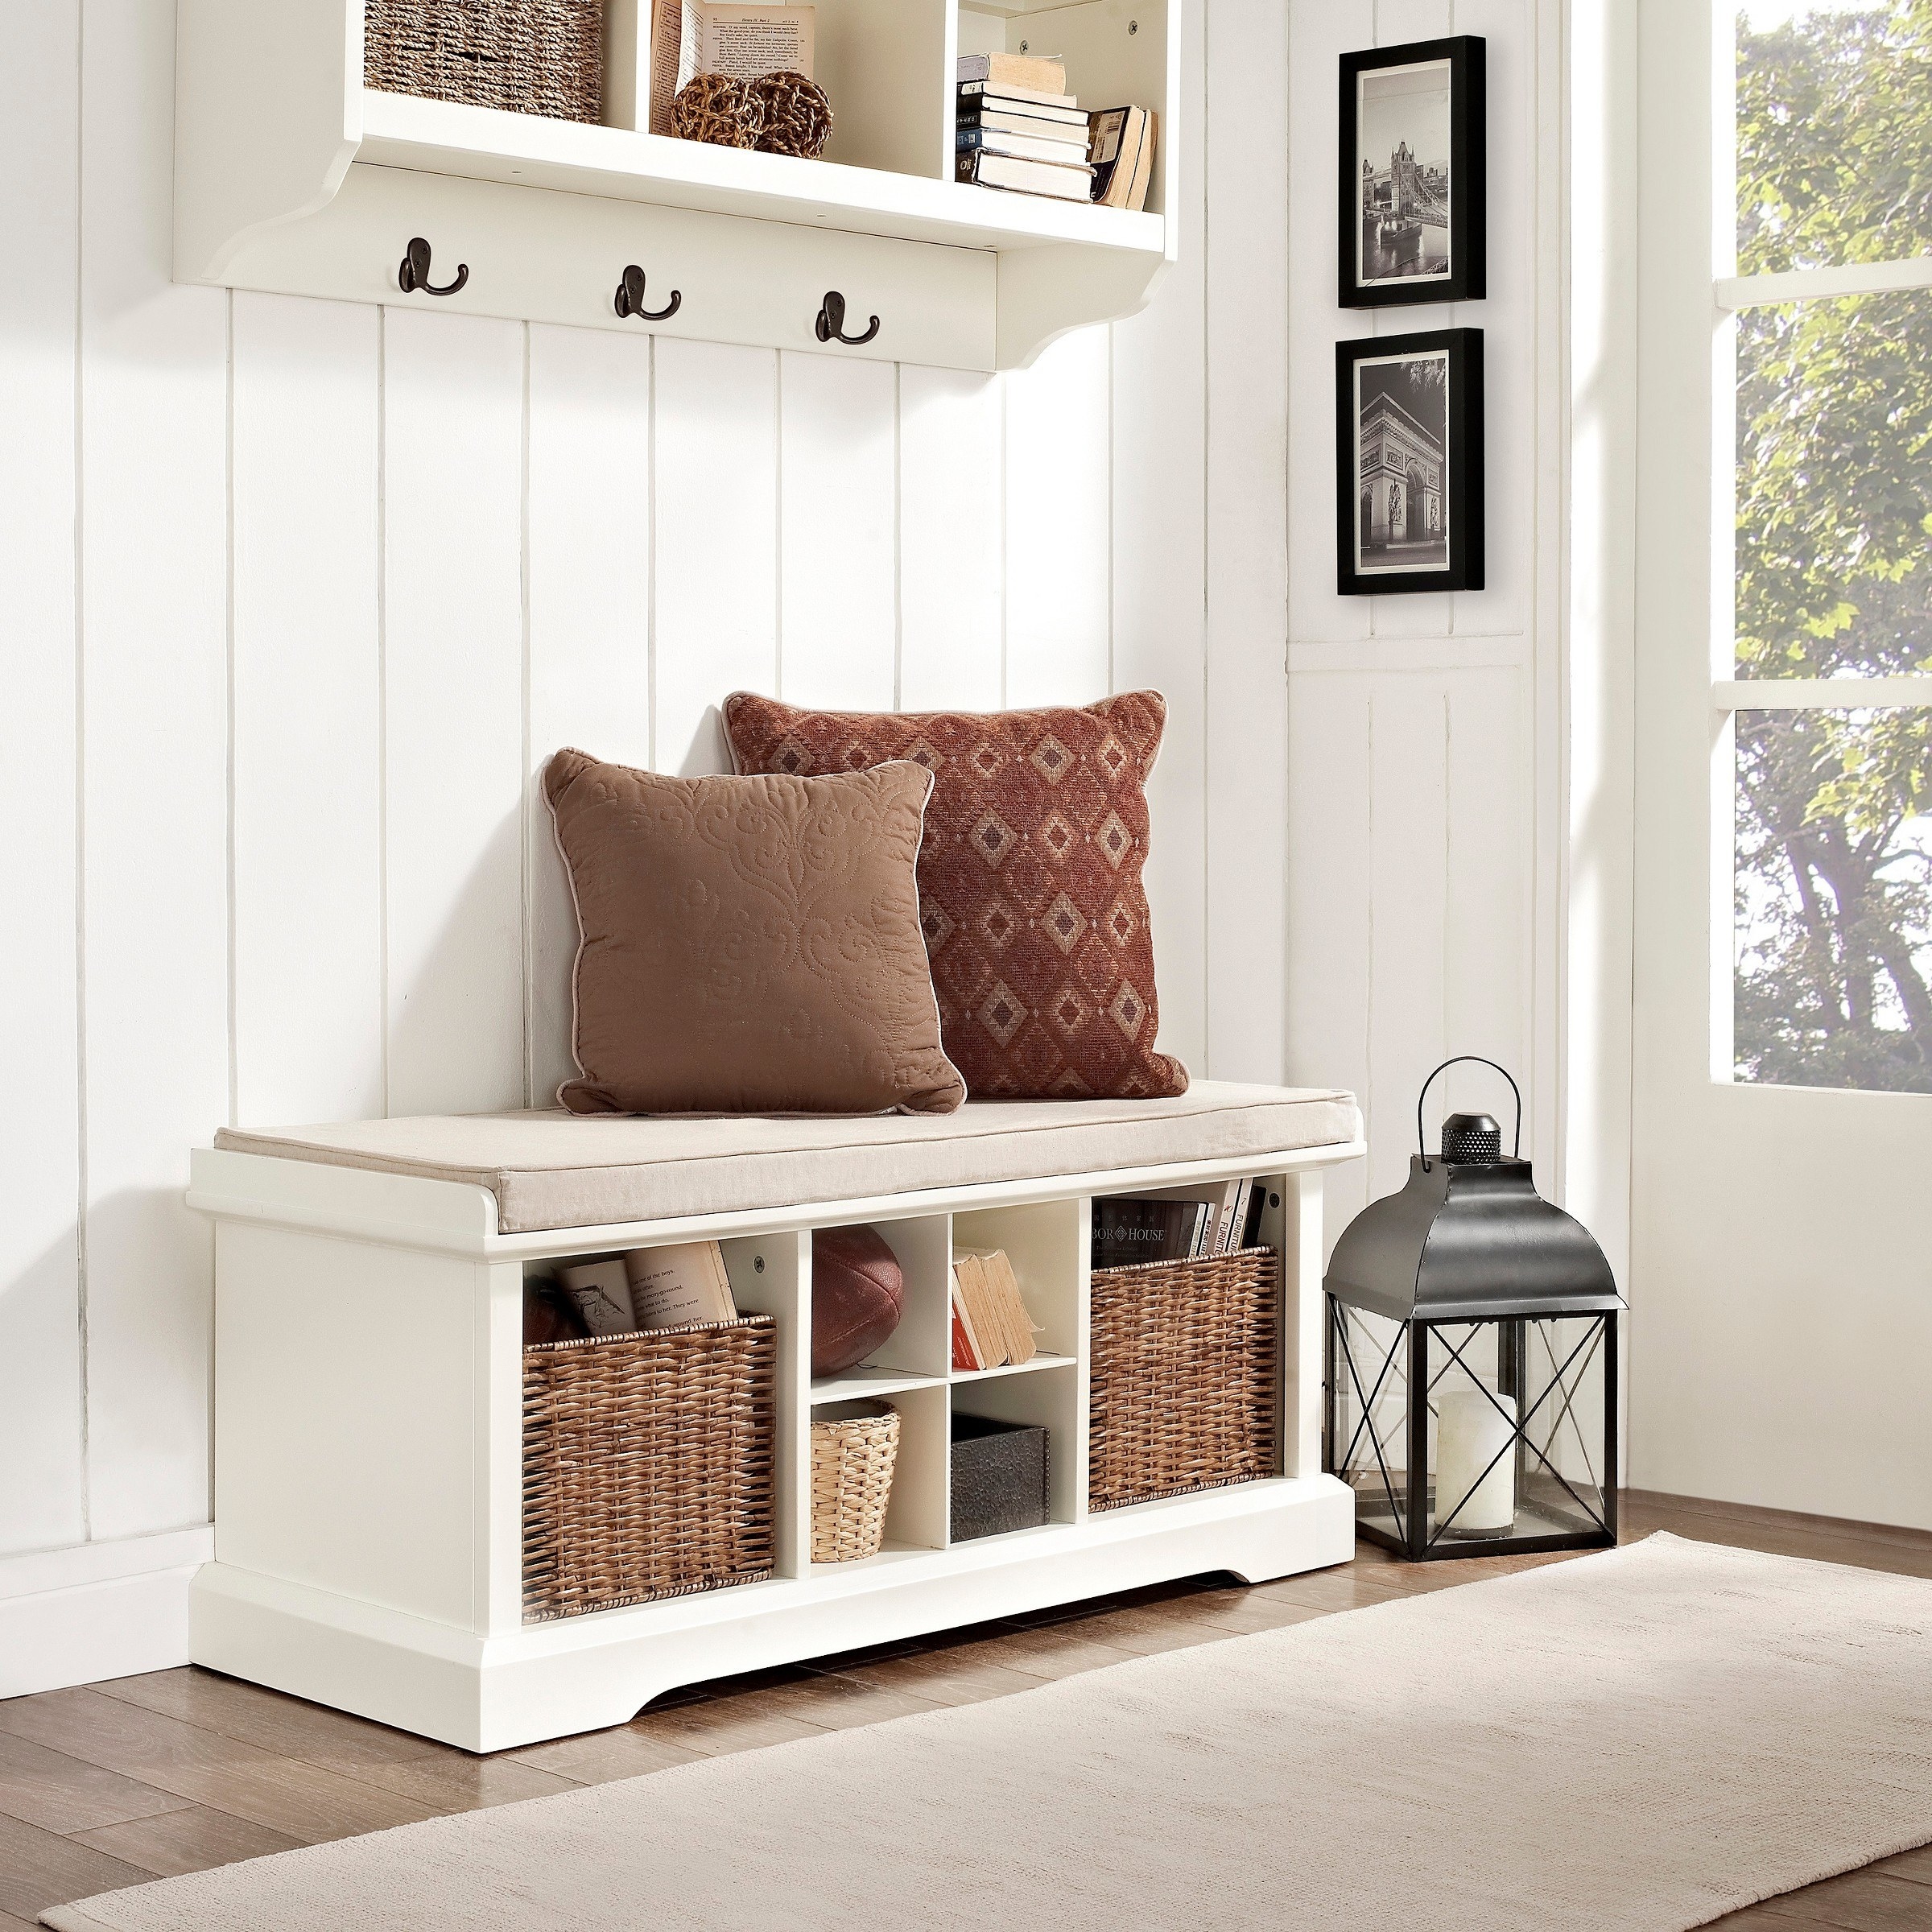 White entryway bench with rattan baskets in the shelves